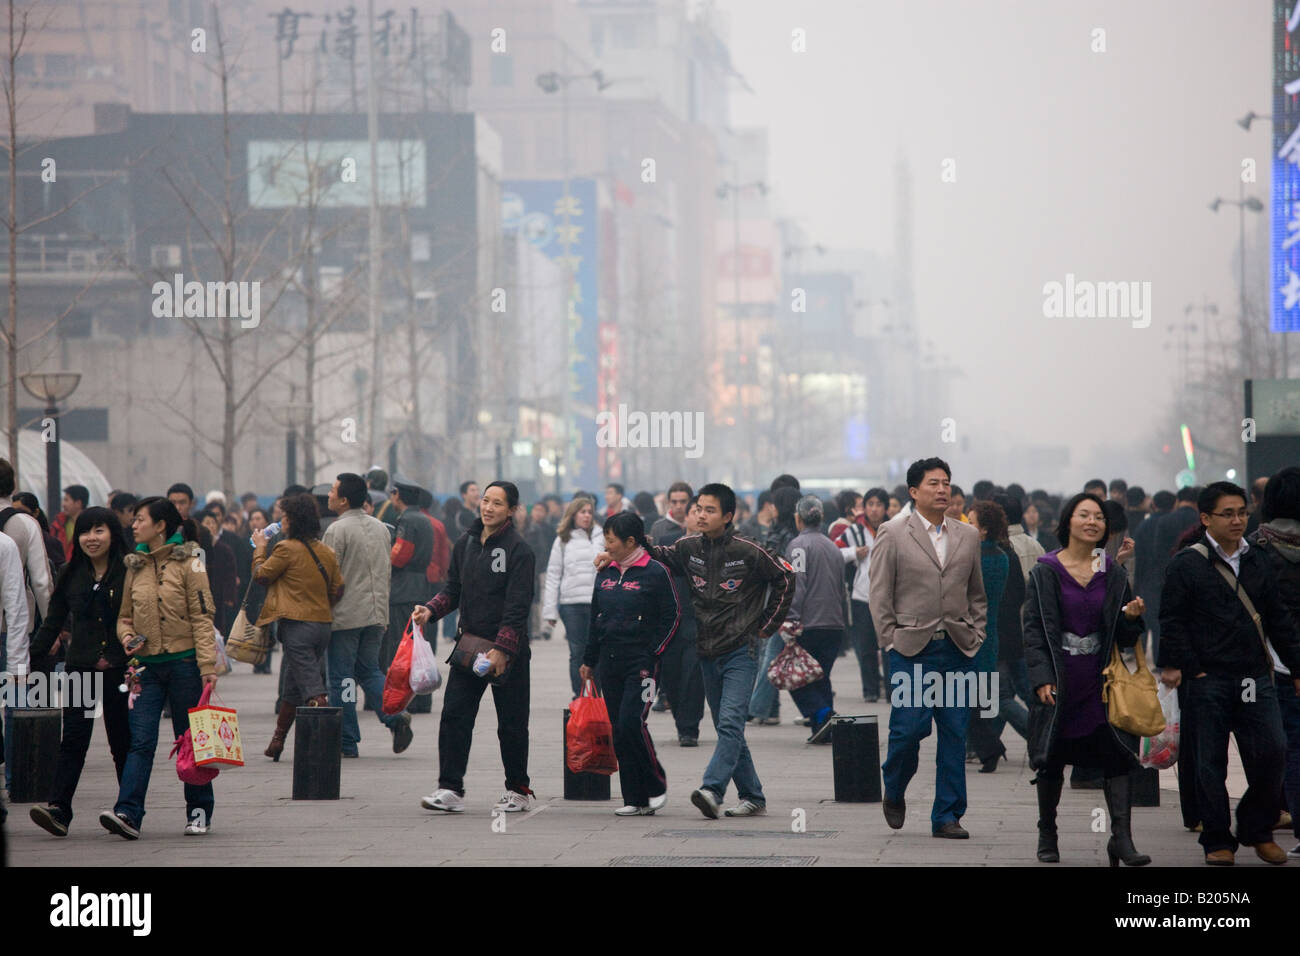 Pedestrians crowded Wangfujing street and shops in smoggy Central Beijing China Stock Photo